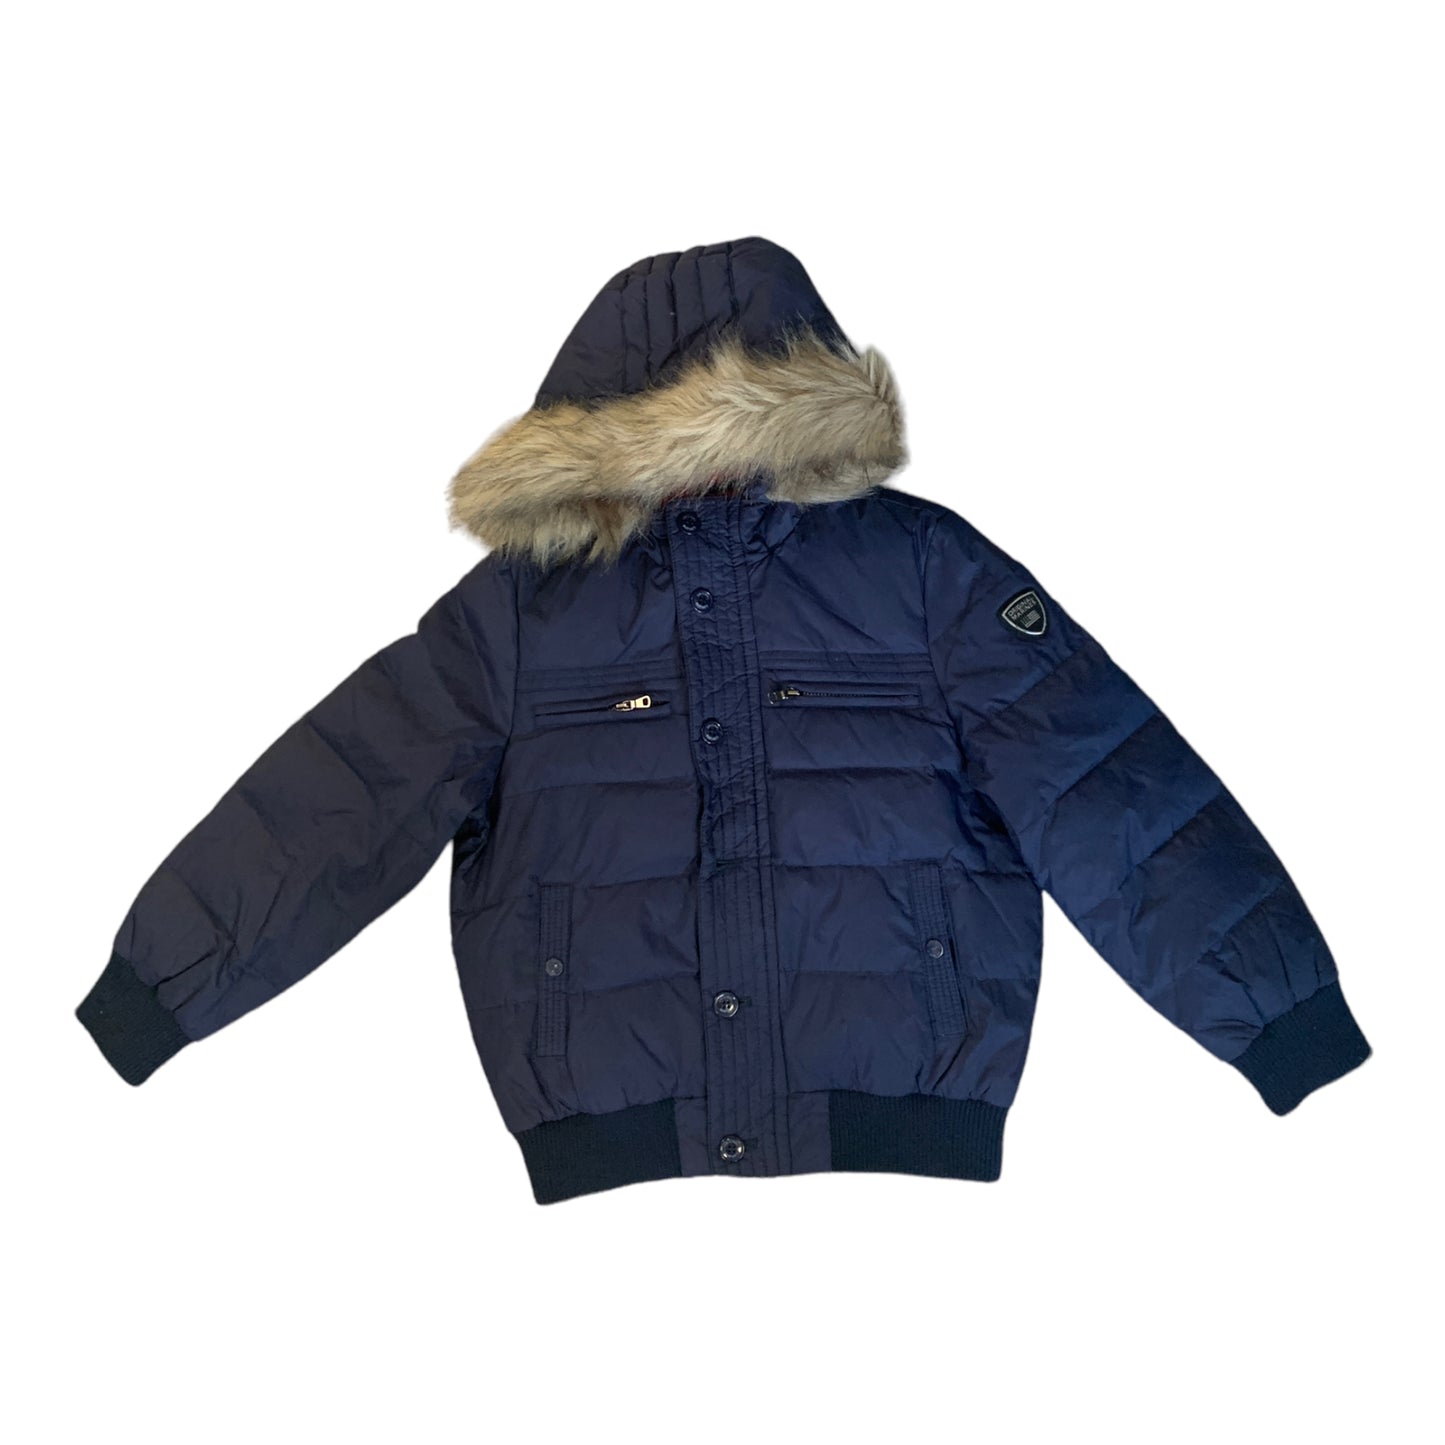 Original Marines padded jacket for children aged 6 years